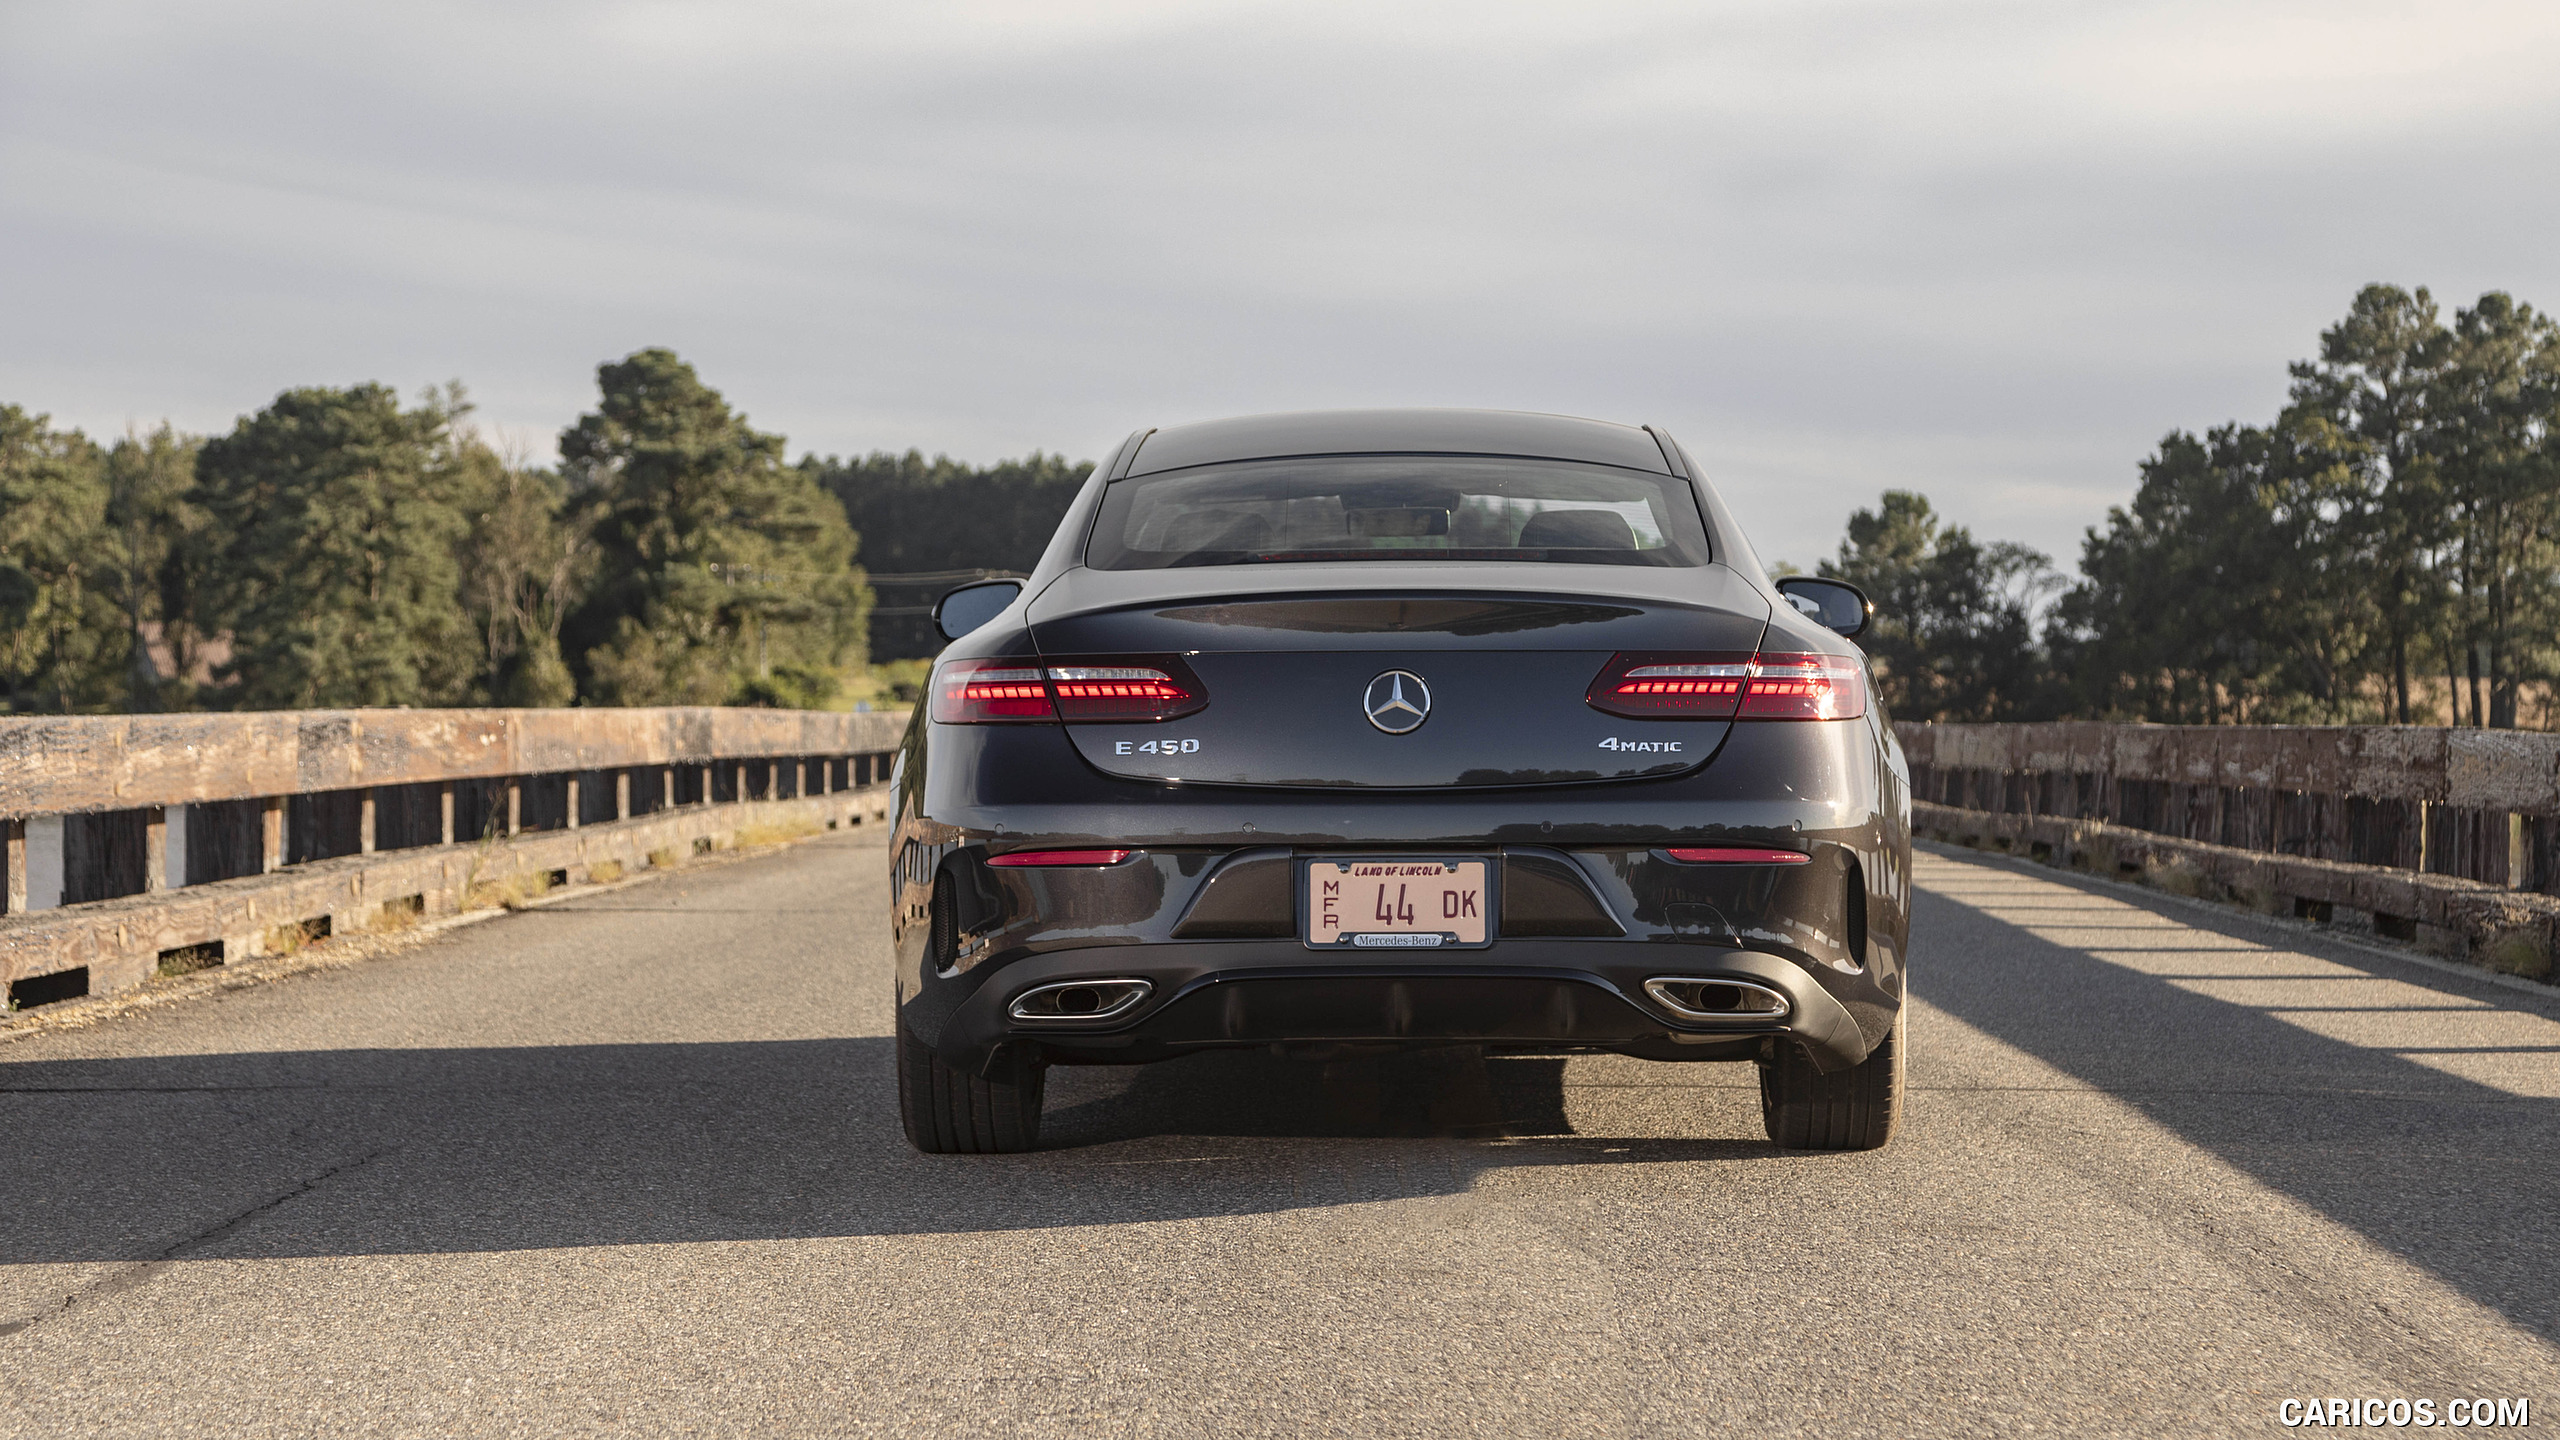 2021 Mercedes-Benz E 450 4MATIC Coupe (US-Spec) - Rear, #20 of 49